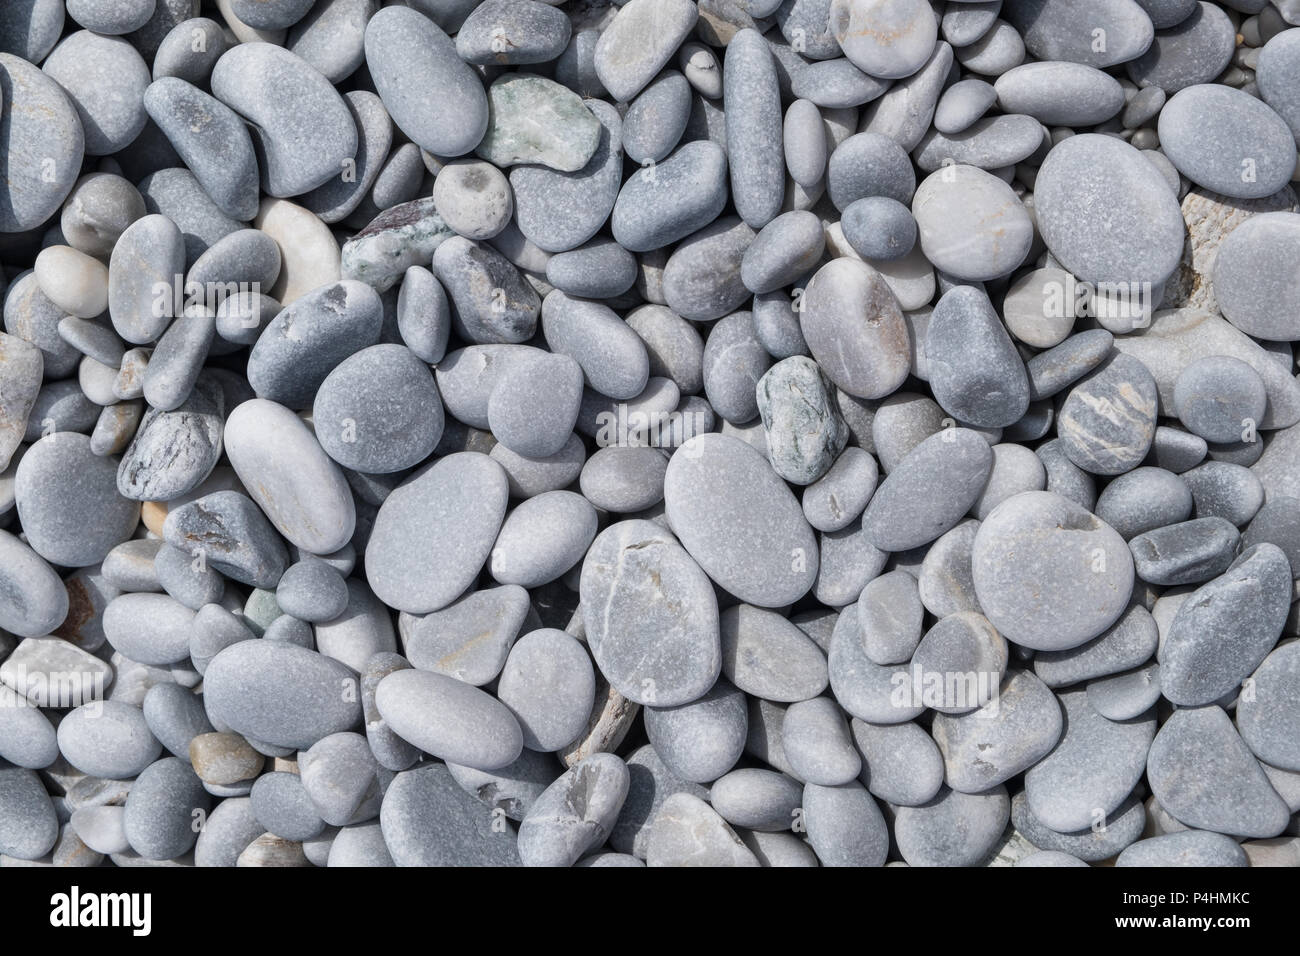 Background of pebbles on a beach. Stock Photo